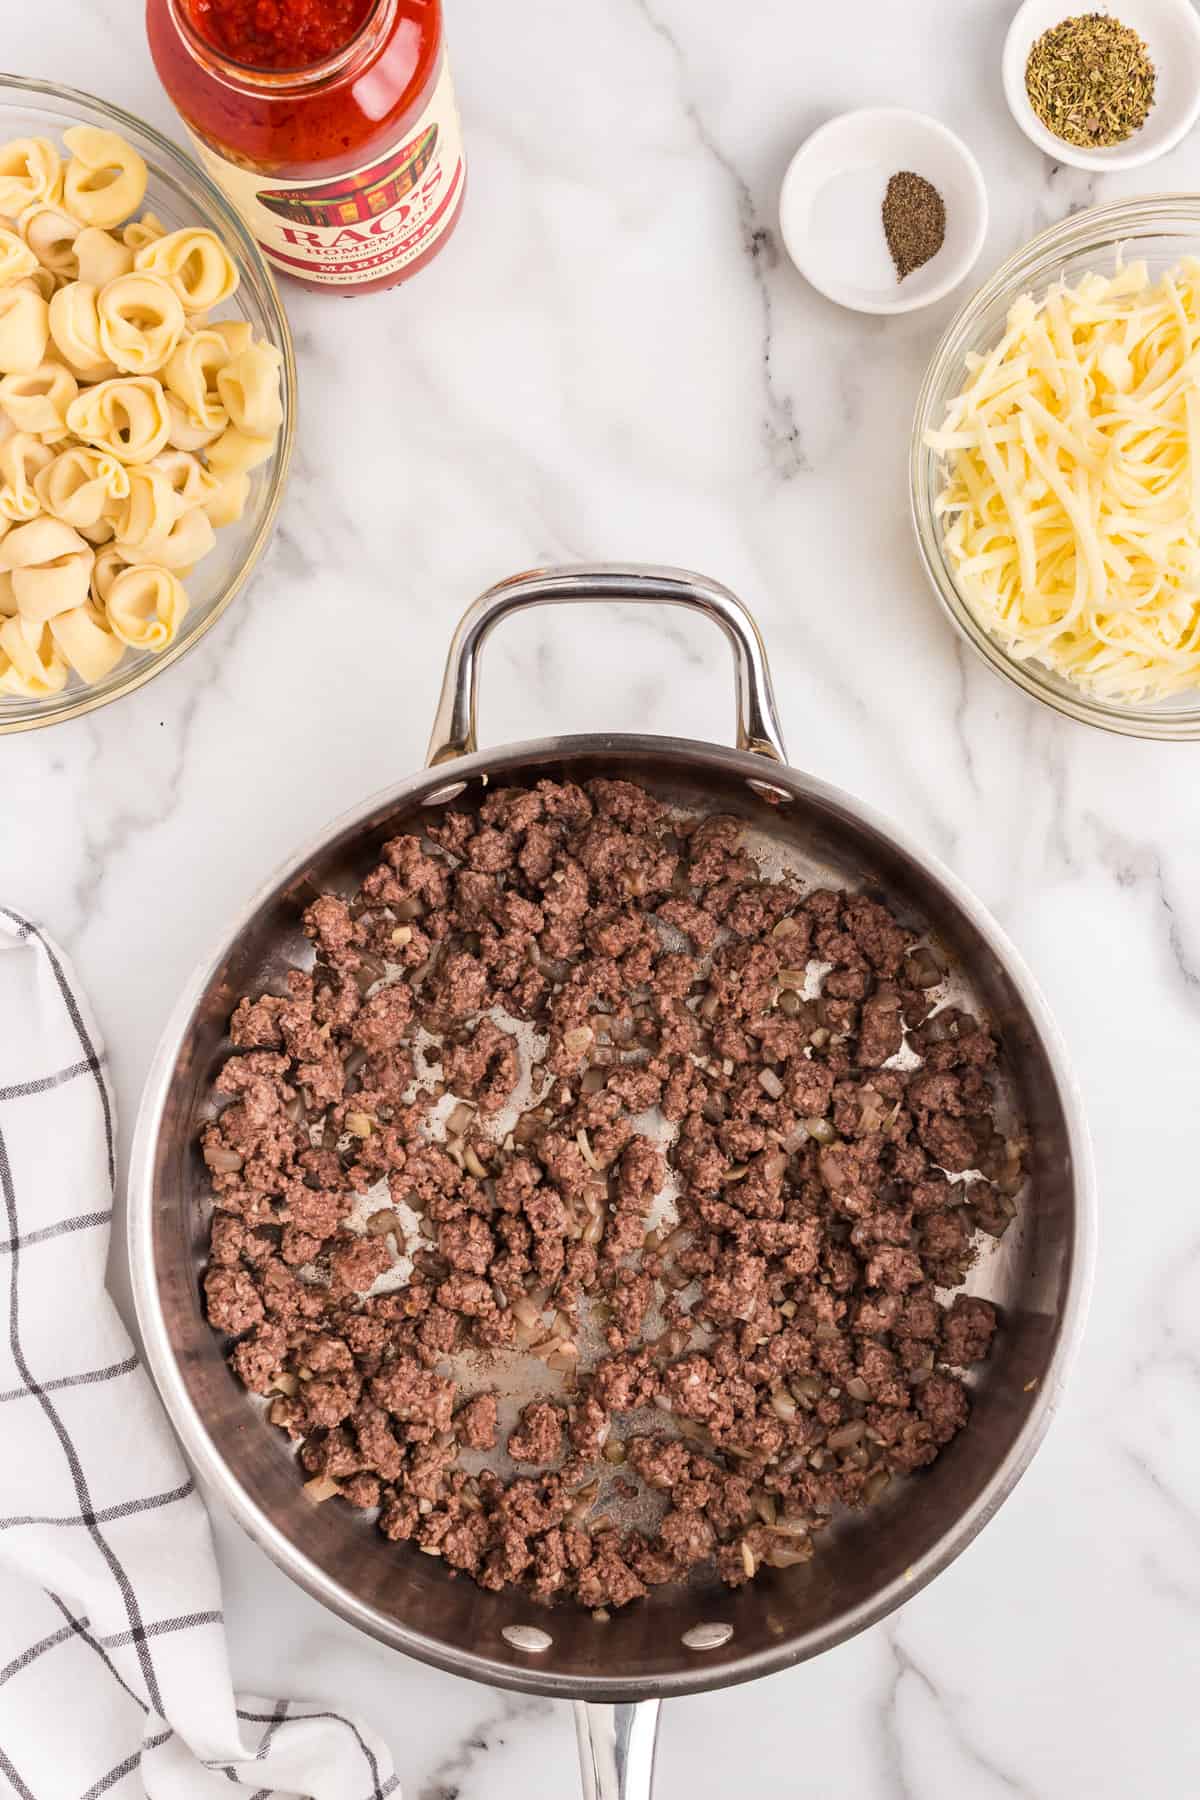 Browned and seasoned ground beef in skillet for Baked Tortellini recipe